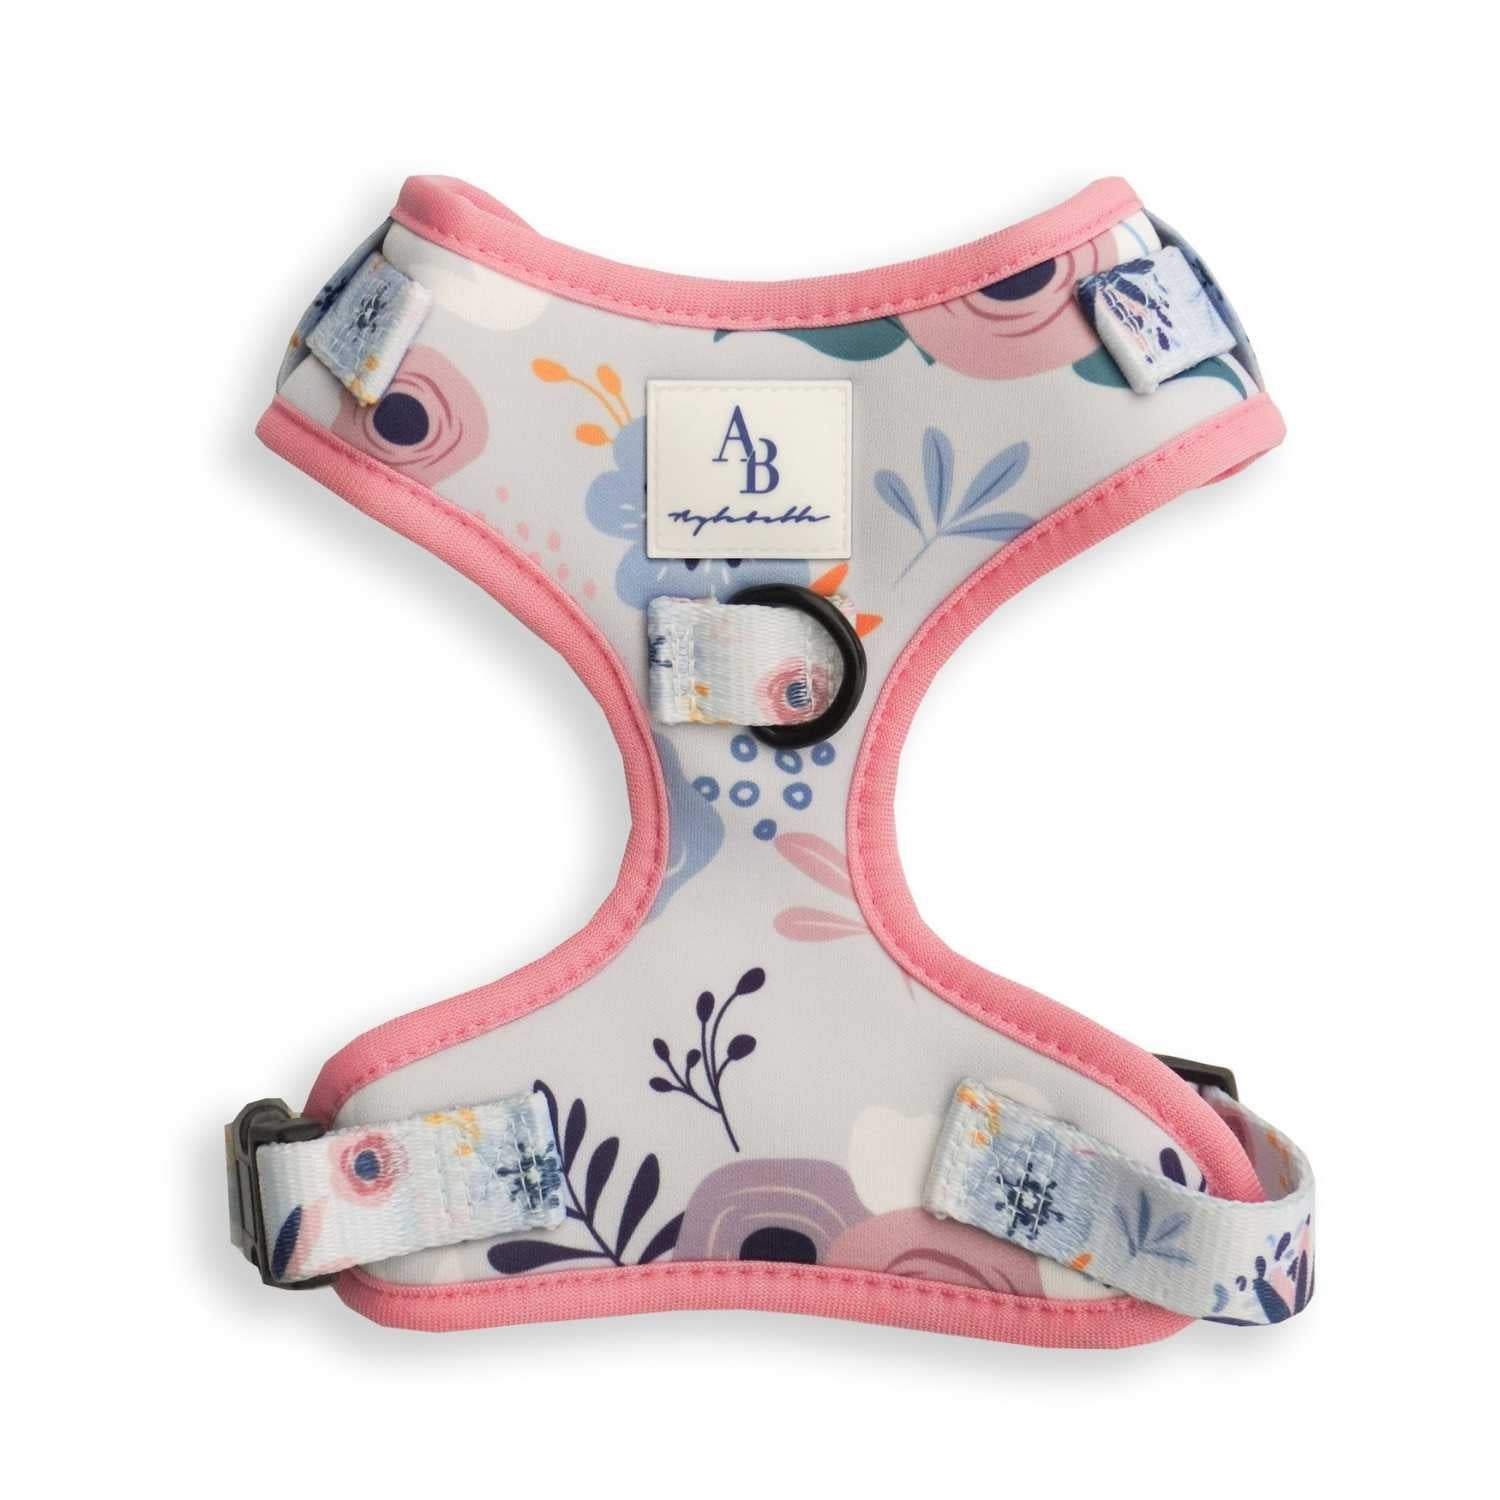 Aylabella Co. - Botanicals Harness - Dog Accessories (5 Sizes)